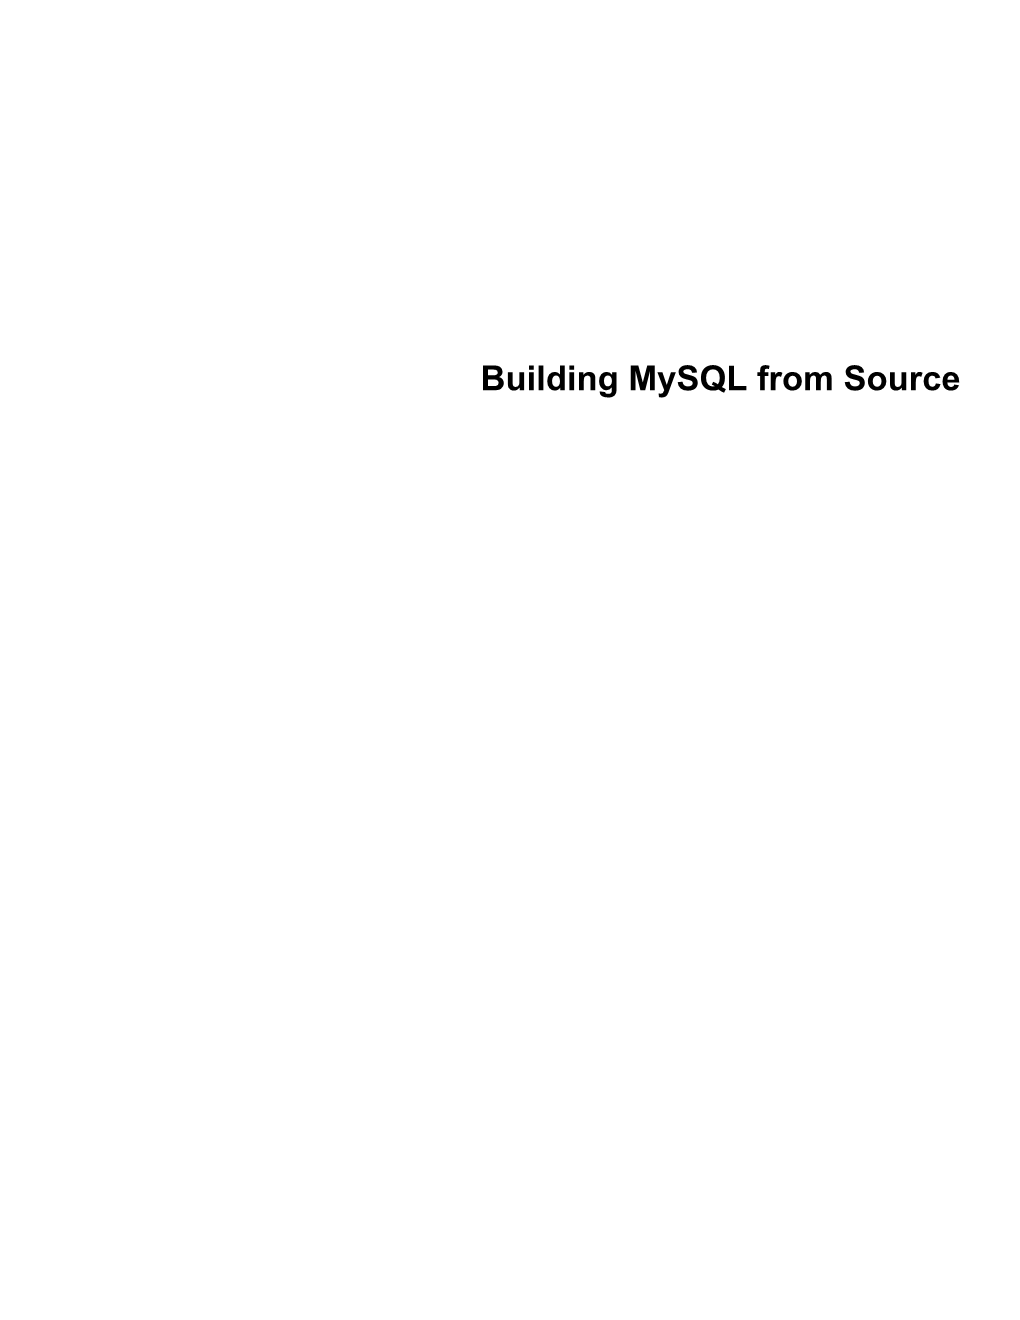 Building Mysql from Source Abstract